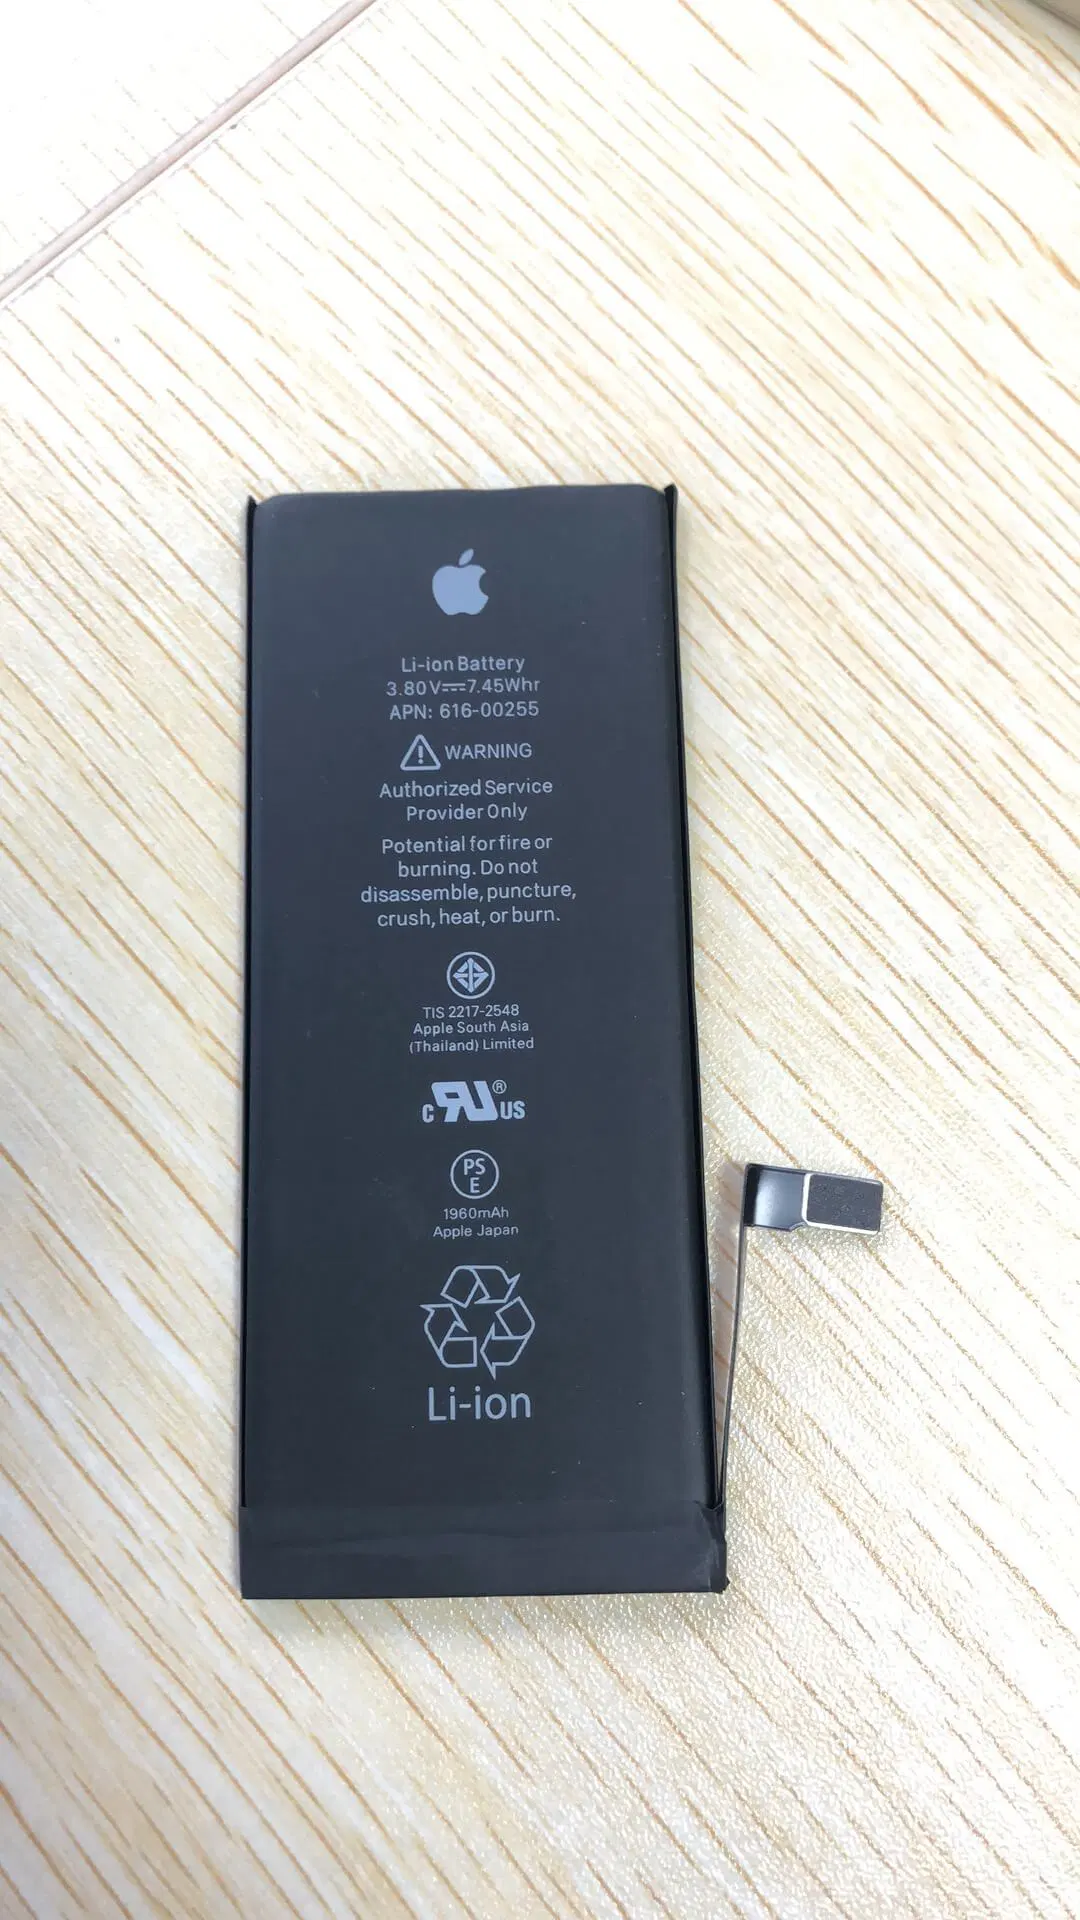 2021 Hot Sale Rechargeable Lithium Mobile Phone Battery for iPhone 5/5s/6/ 6s /6p /6sp/ 7 /7p /8/ 8p Replacement Cell Phone Battery